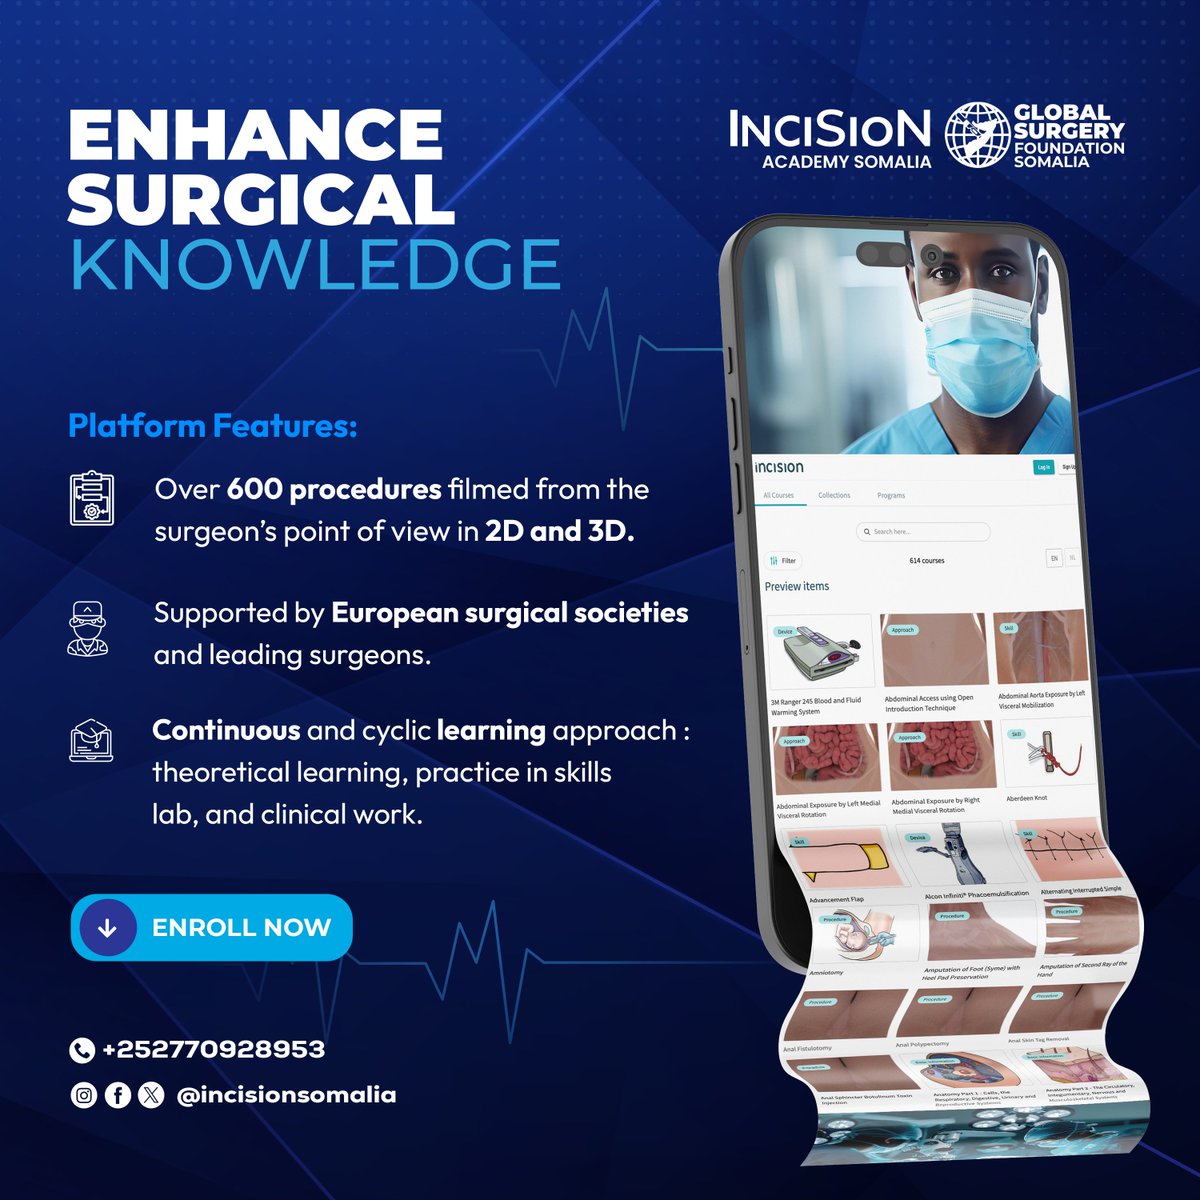 Advance Your Surgical Knowledge! 📚

Content: 'Take your surgical skills to the next level with comprehensive courses from Incision Somalia. Learn from the best with over 600 detailed procedures. 📞 Contact us at +252770928953 to get started!
#IncisionSomalia #IncisionAcademy